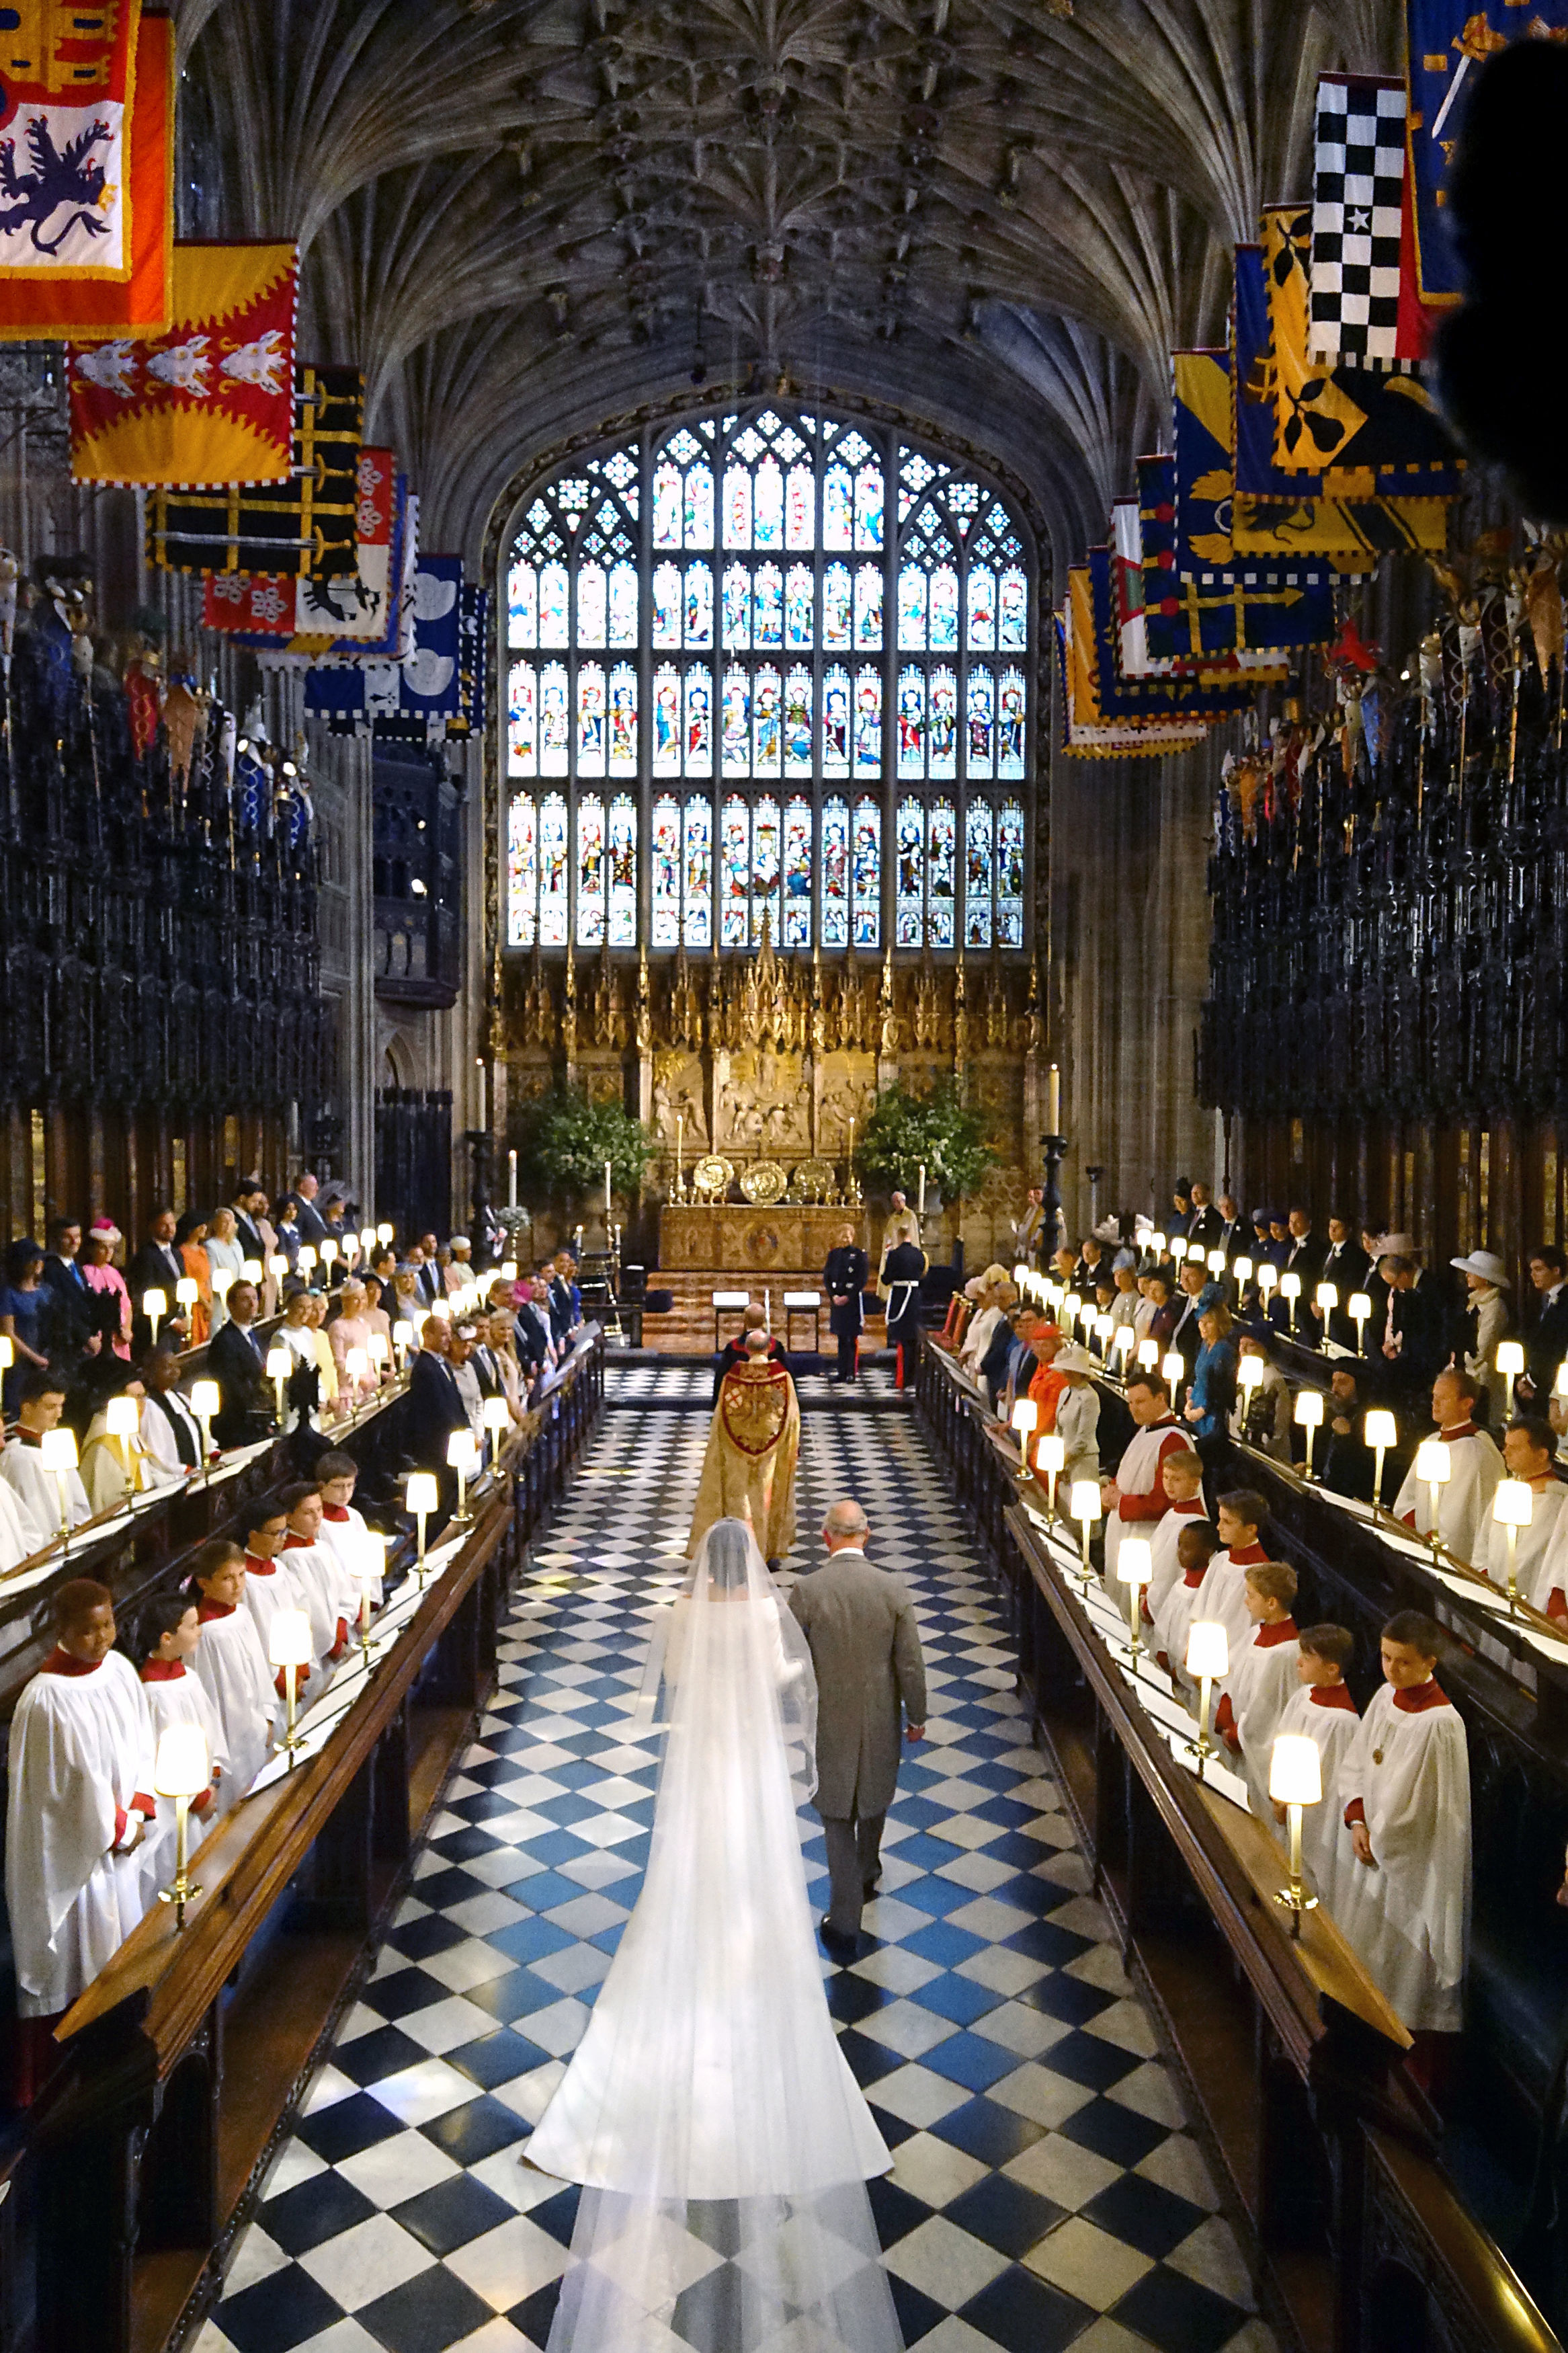 The Prince of Wales walking Meghan Markle up the aisle of St George's Chapel in 2018 